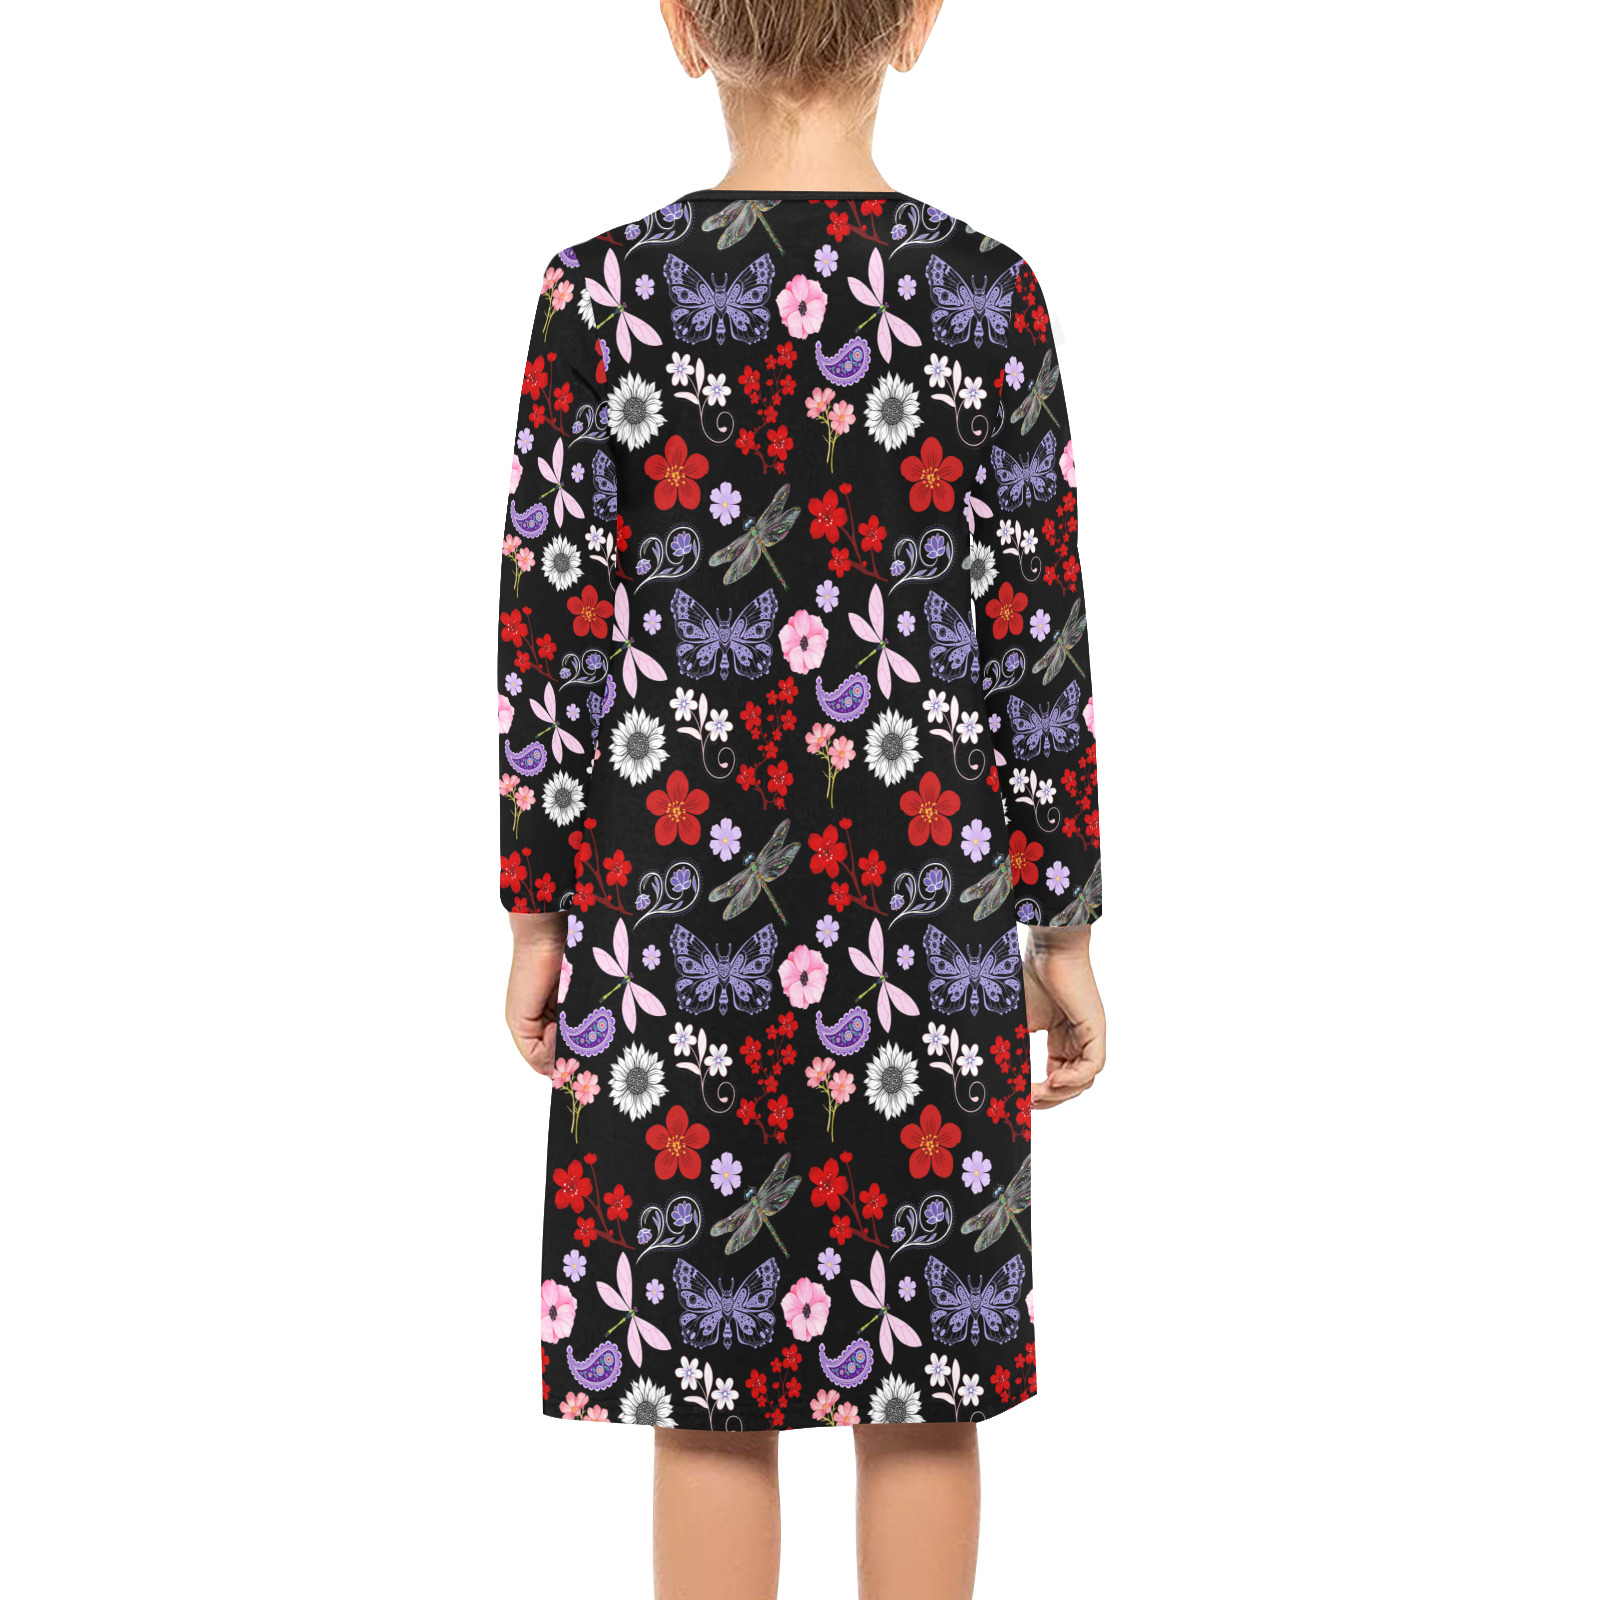 Black, Red, Pink, Purple, Dragonflies, Butterfly and Flowers Design Girls' Long Sleeve Dress (Model D59)